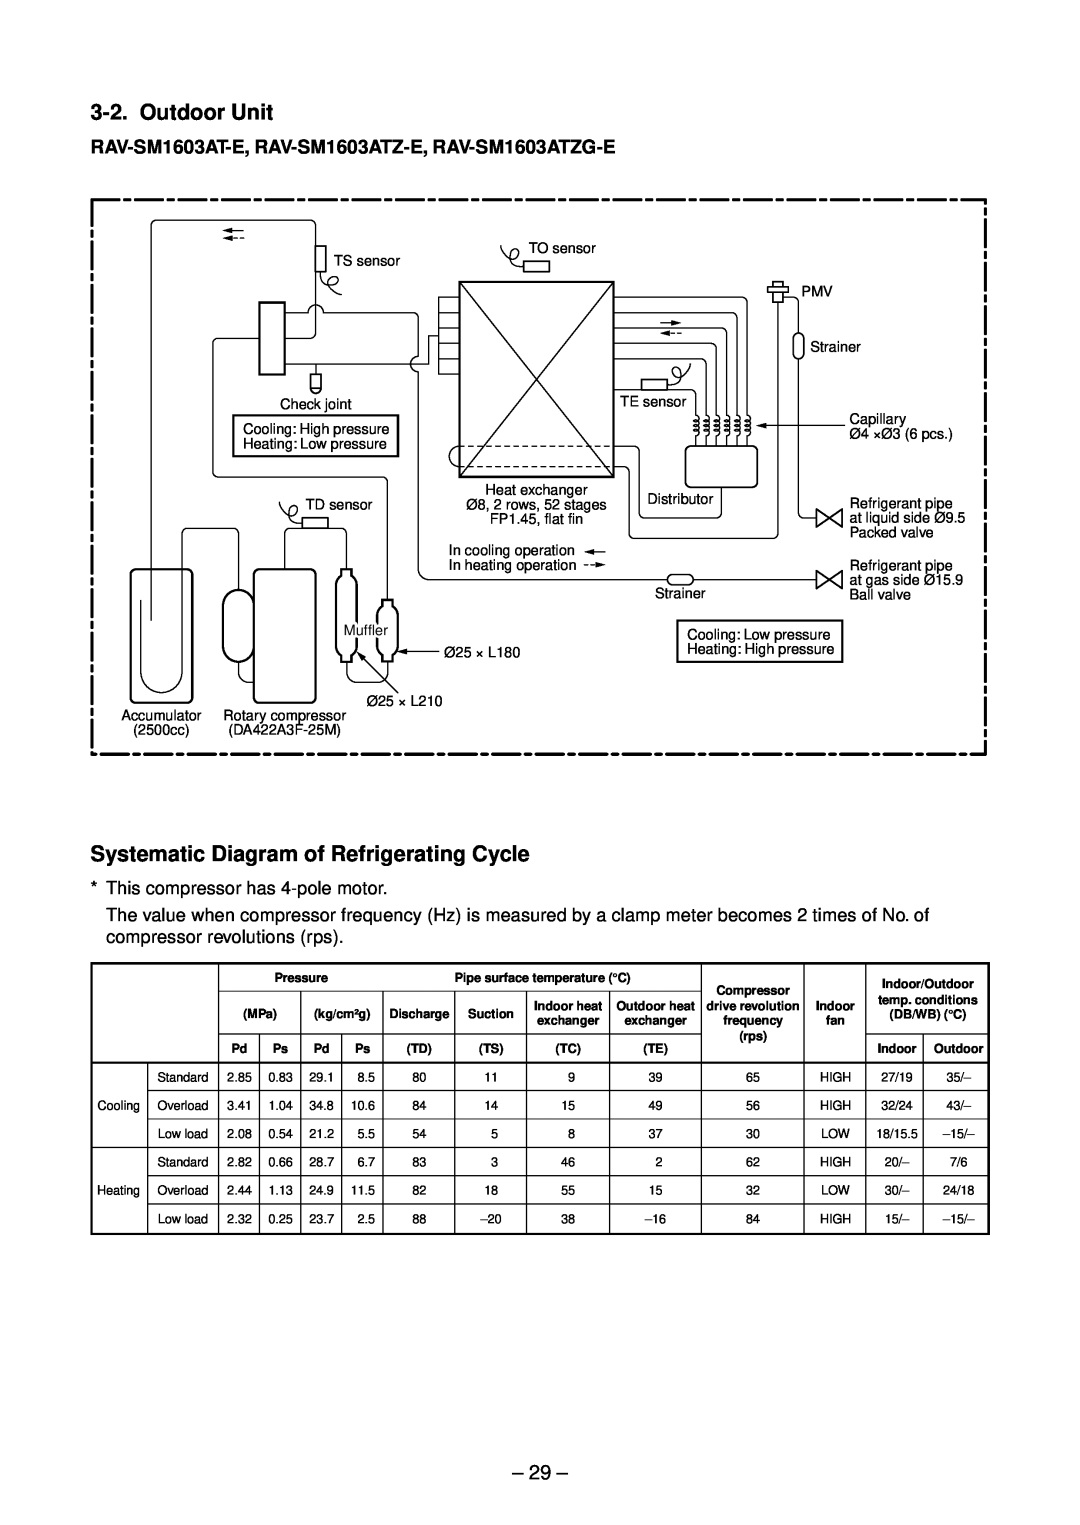 Toshiba RAV-SM1603ATZG-E, RAV-SM1603DT-A, RAV-SM1603ATZ-E Outdoor Unit, Systematic Diagram of Refrigerating Cycle, 29 